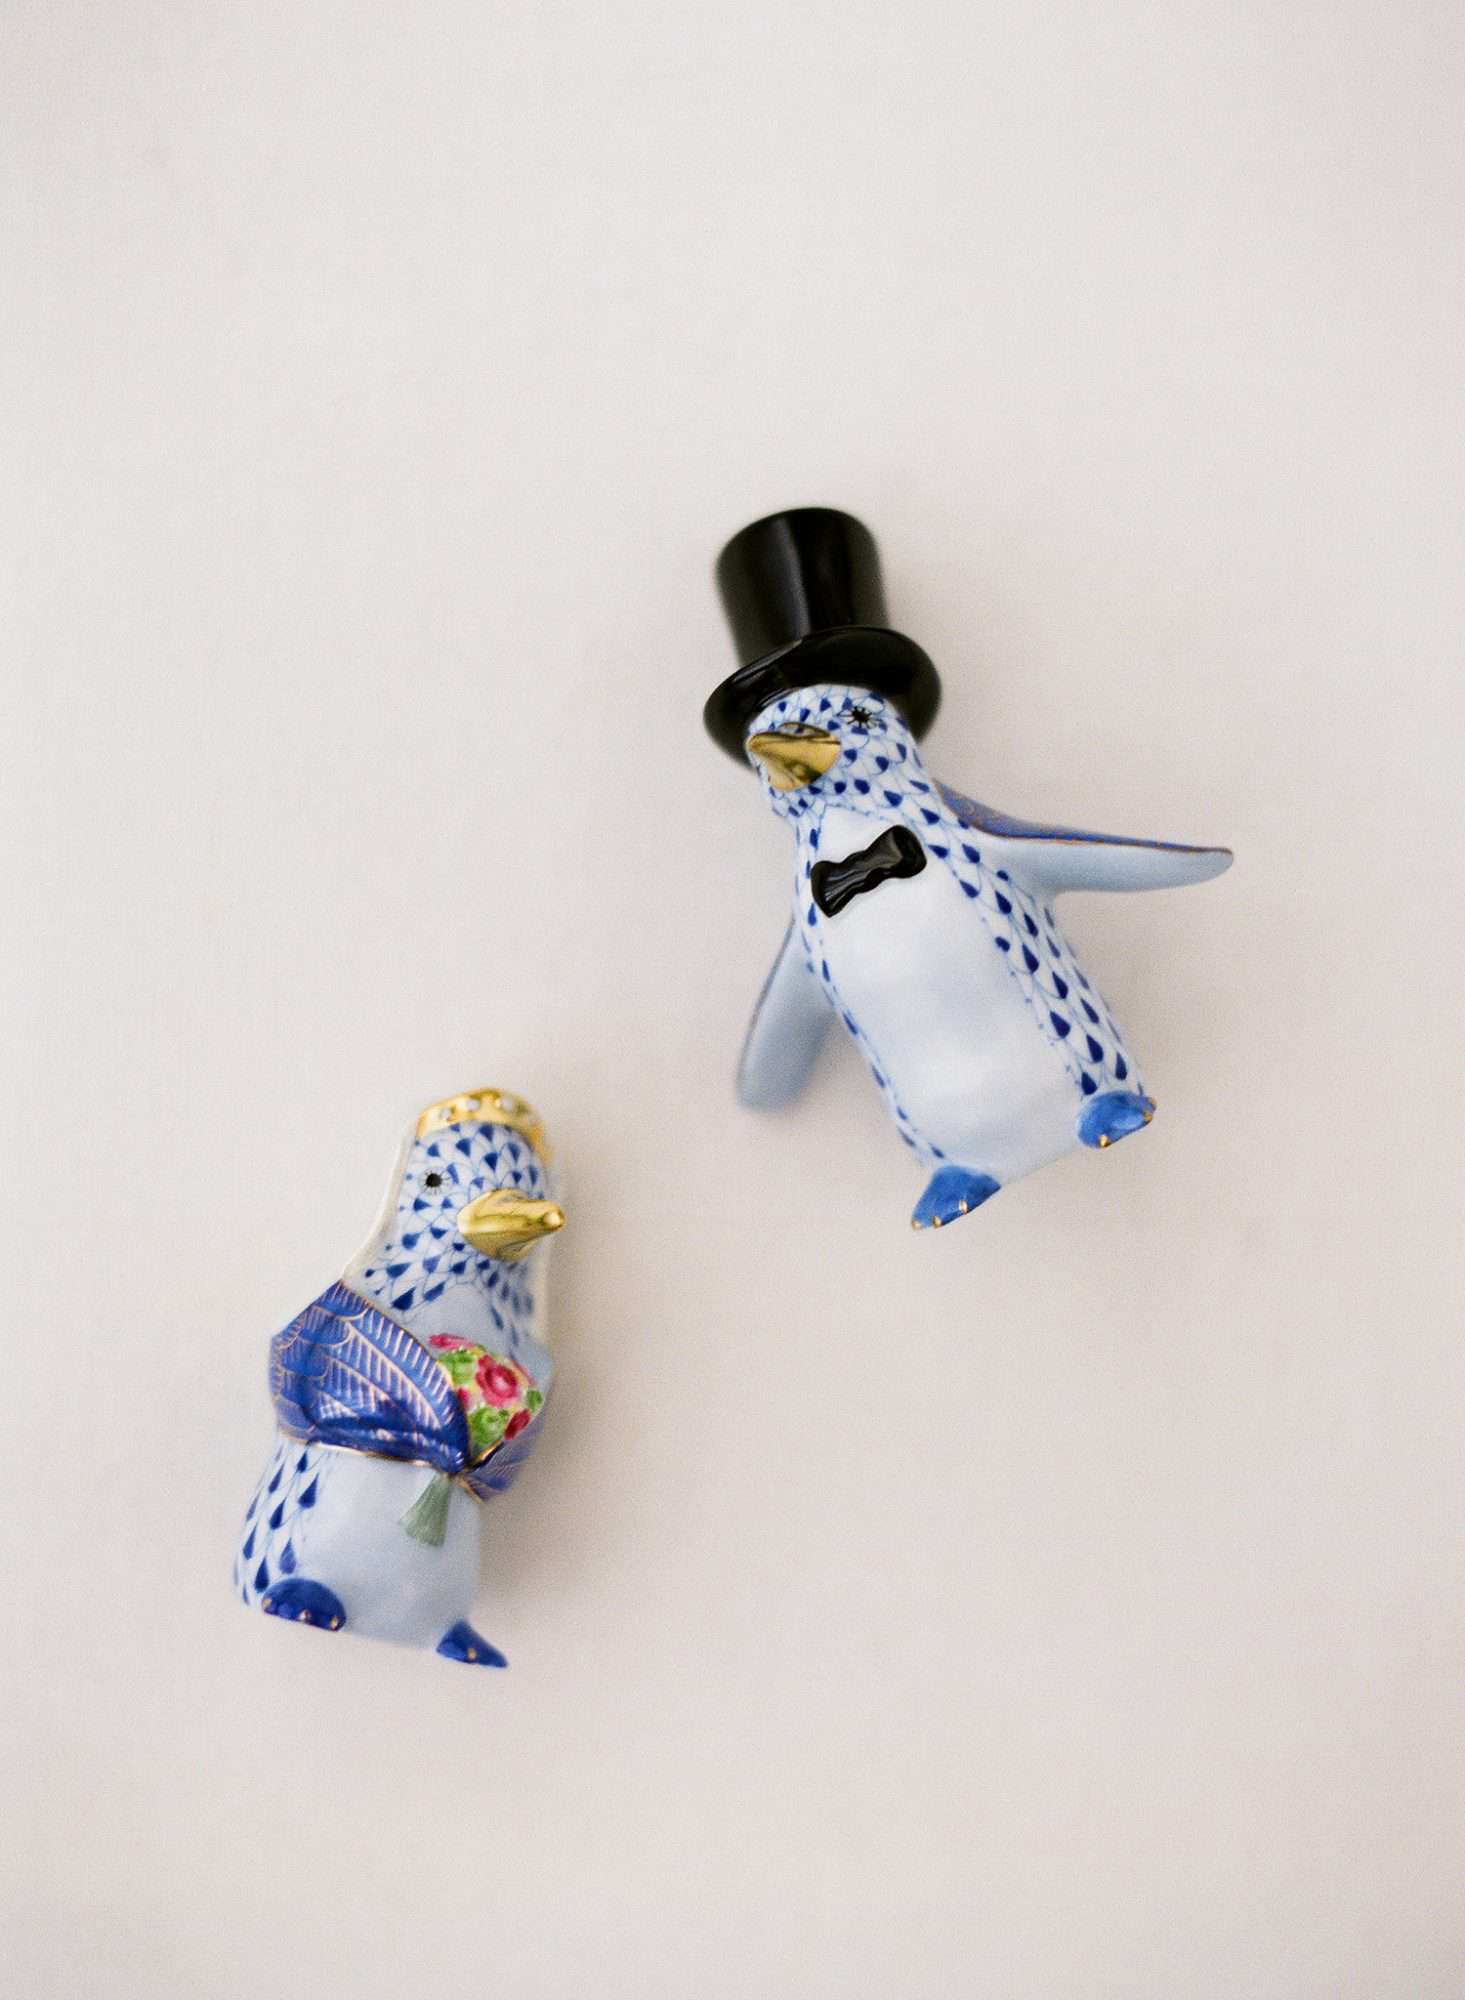 chelsea conor wedding cake toppers penguins